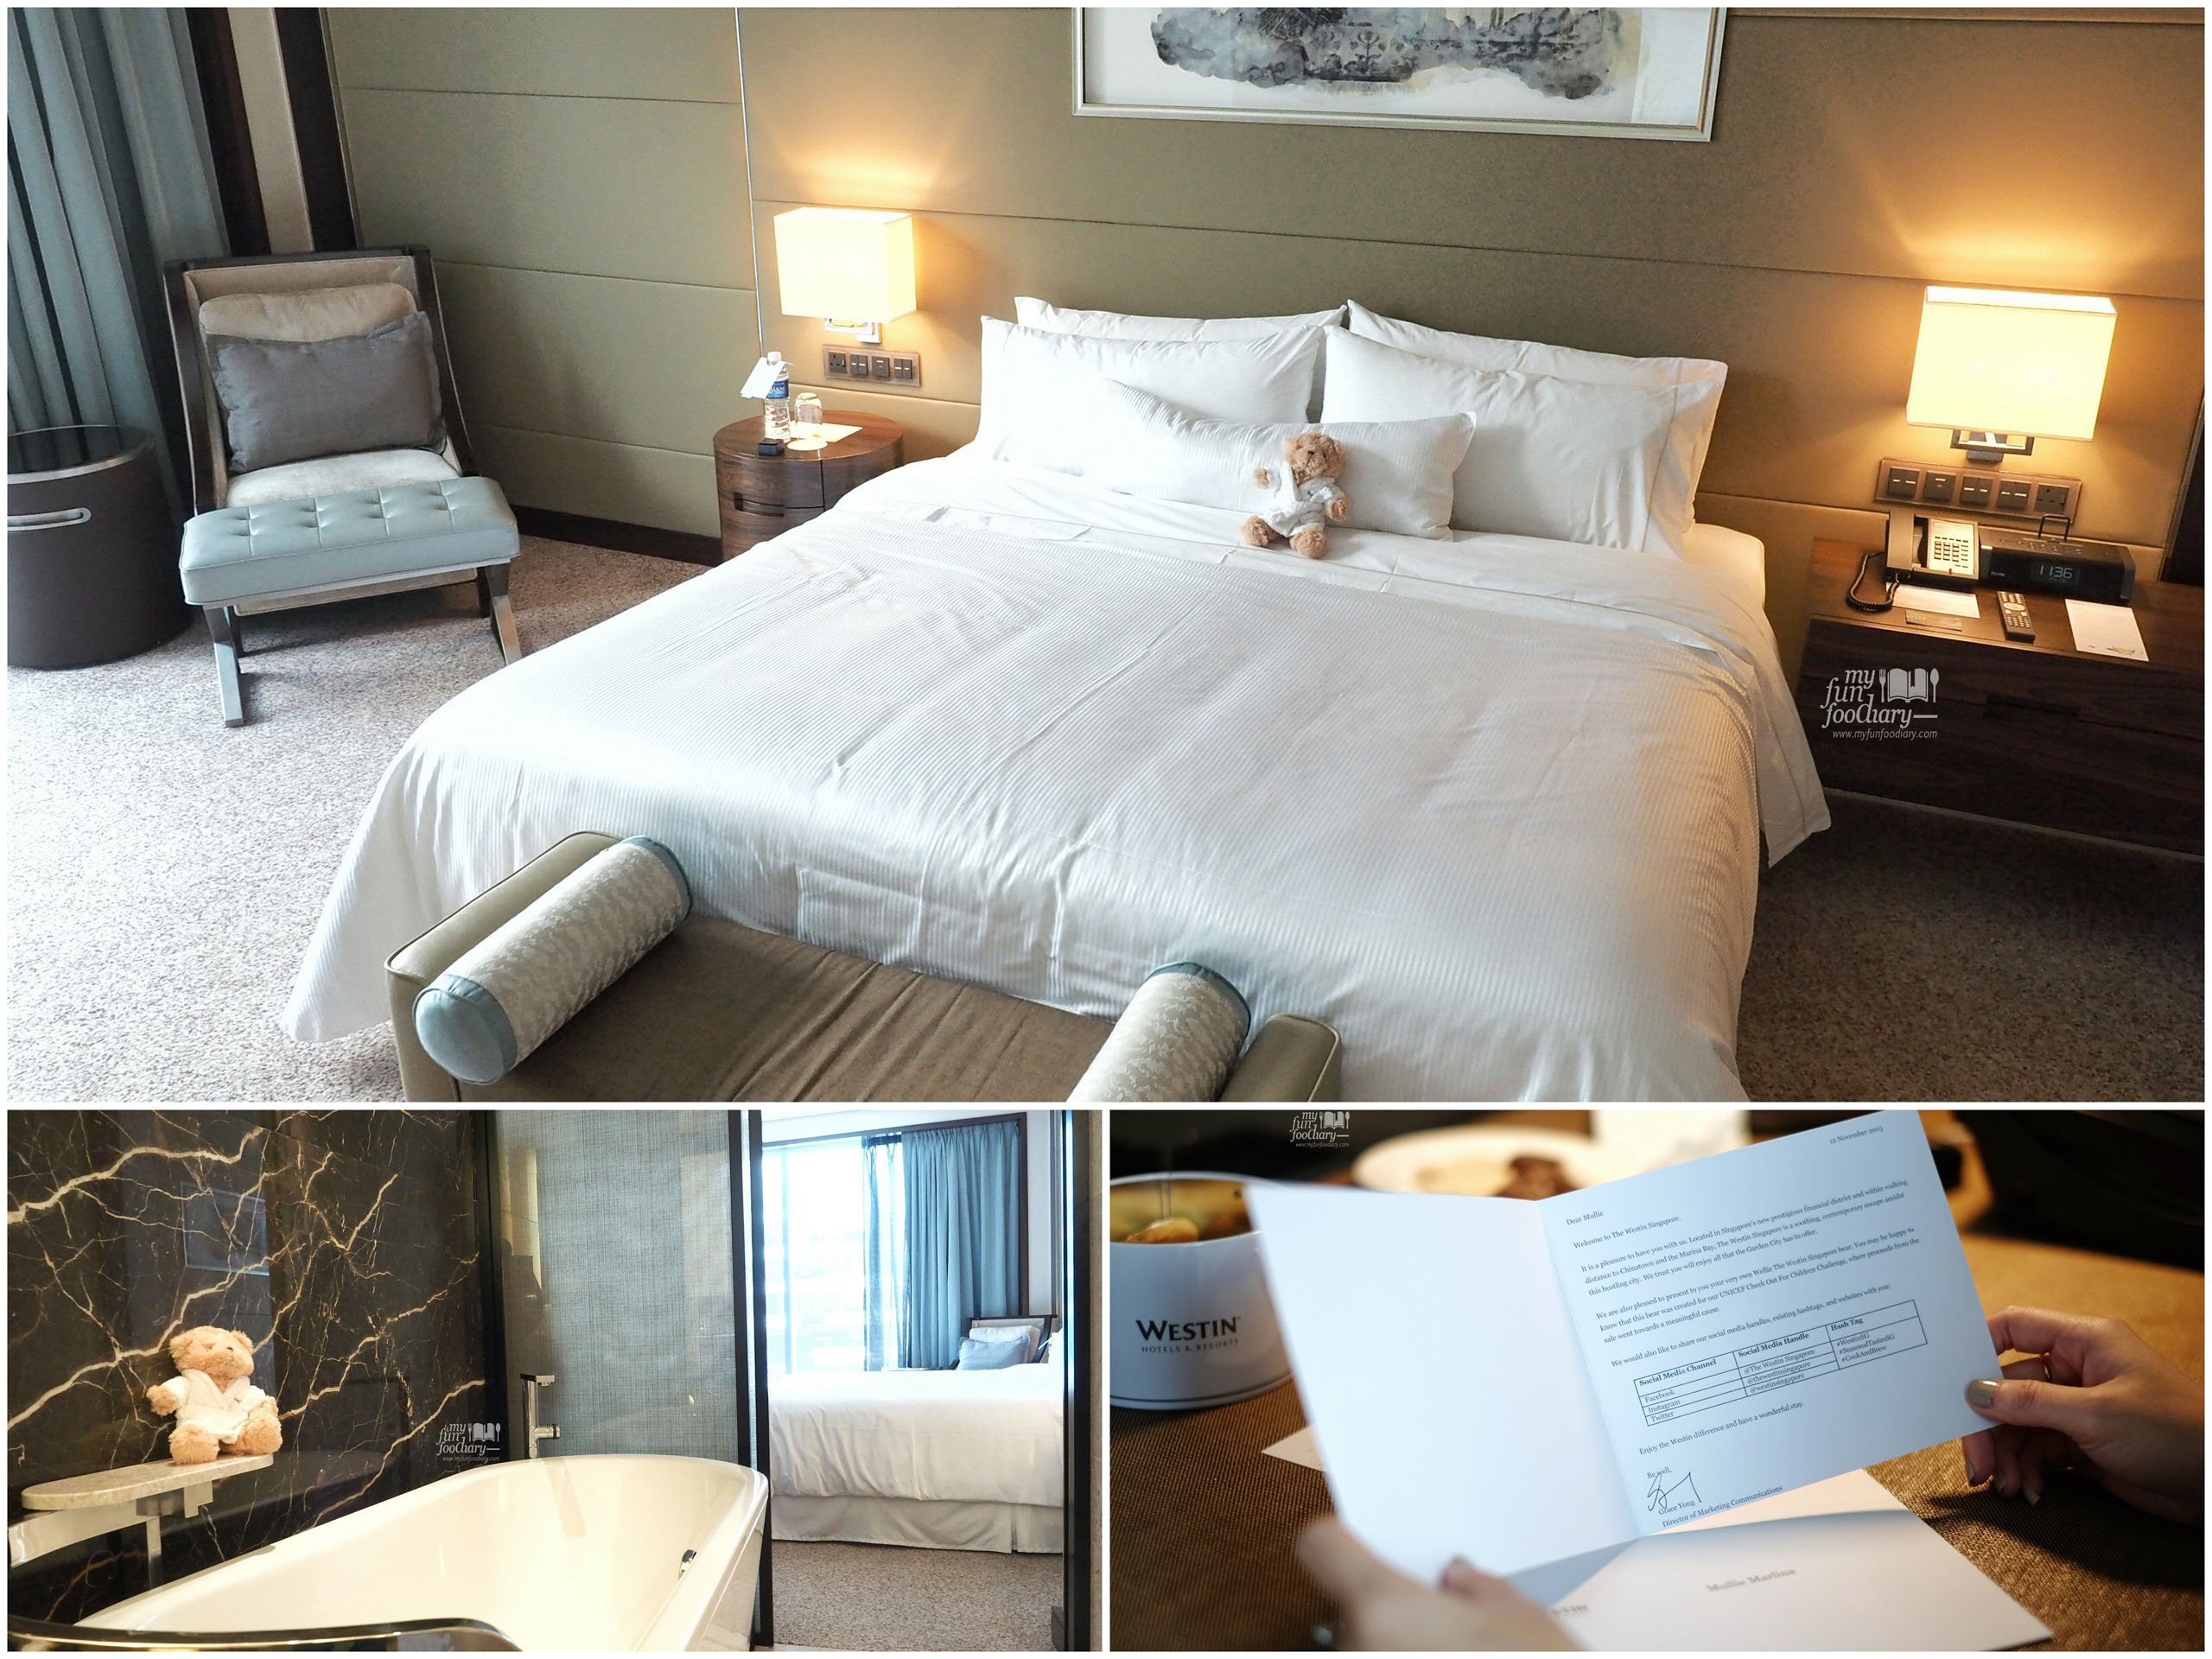 Sea View Room at Westin Singapore by Myfunfoodiary collage